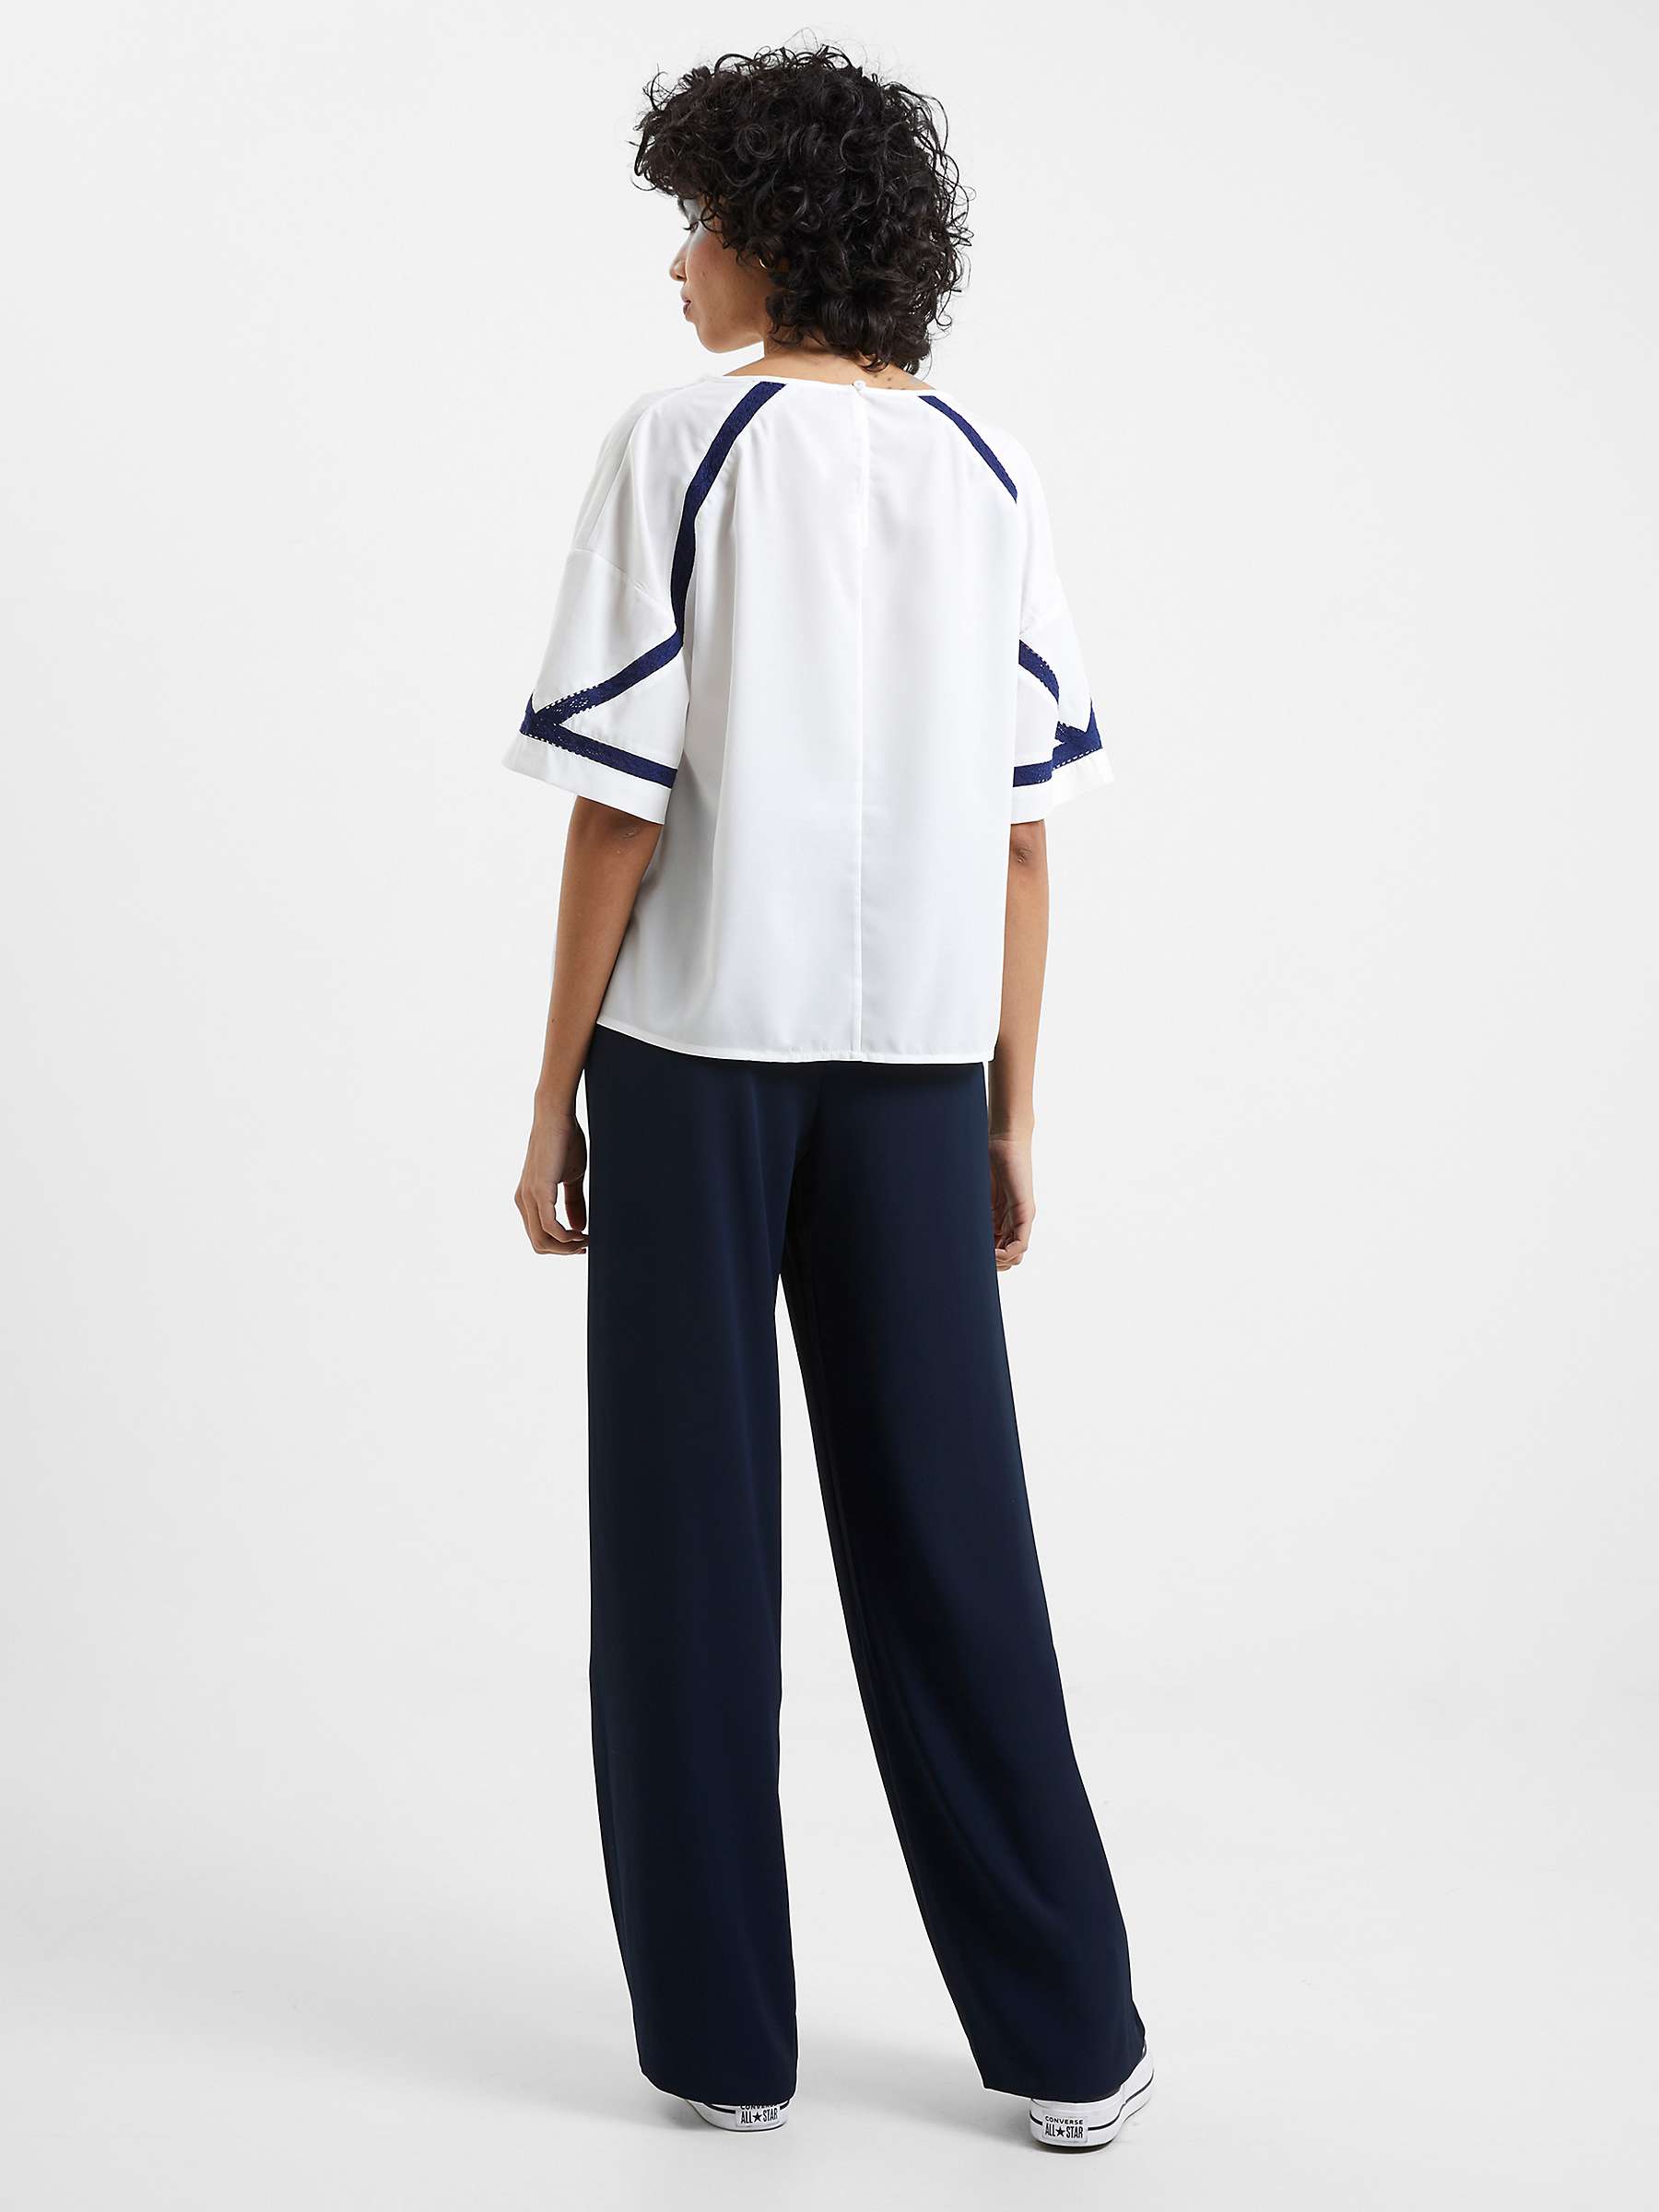 Buy French Connection Light Crepe Top Online at johnlewis.com